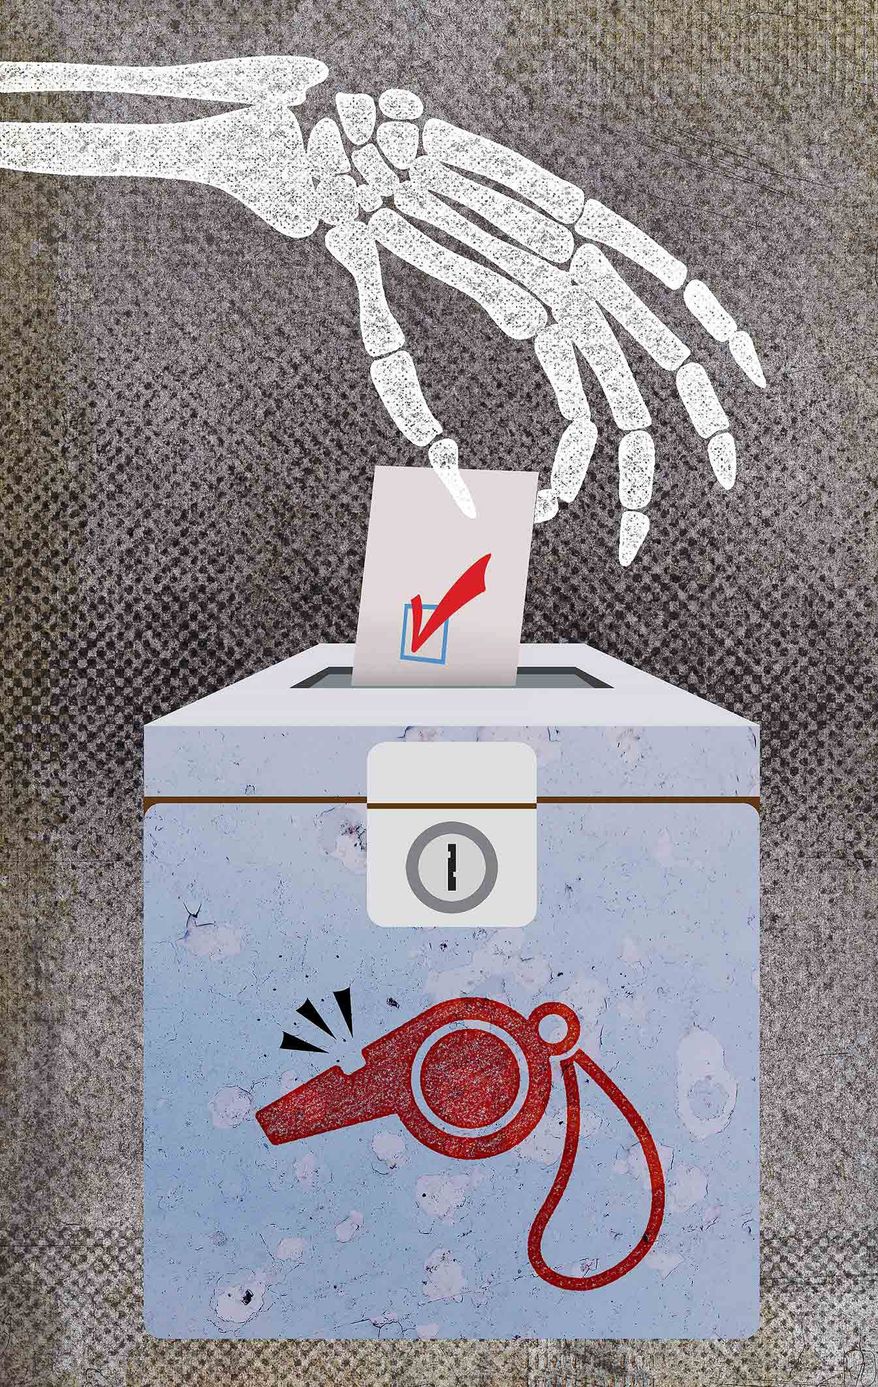 Election Integrity, Voter Fraud and Ballot Box Whistleblower Illustration by Greg Groesch/The Washington Times